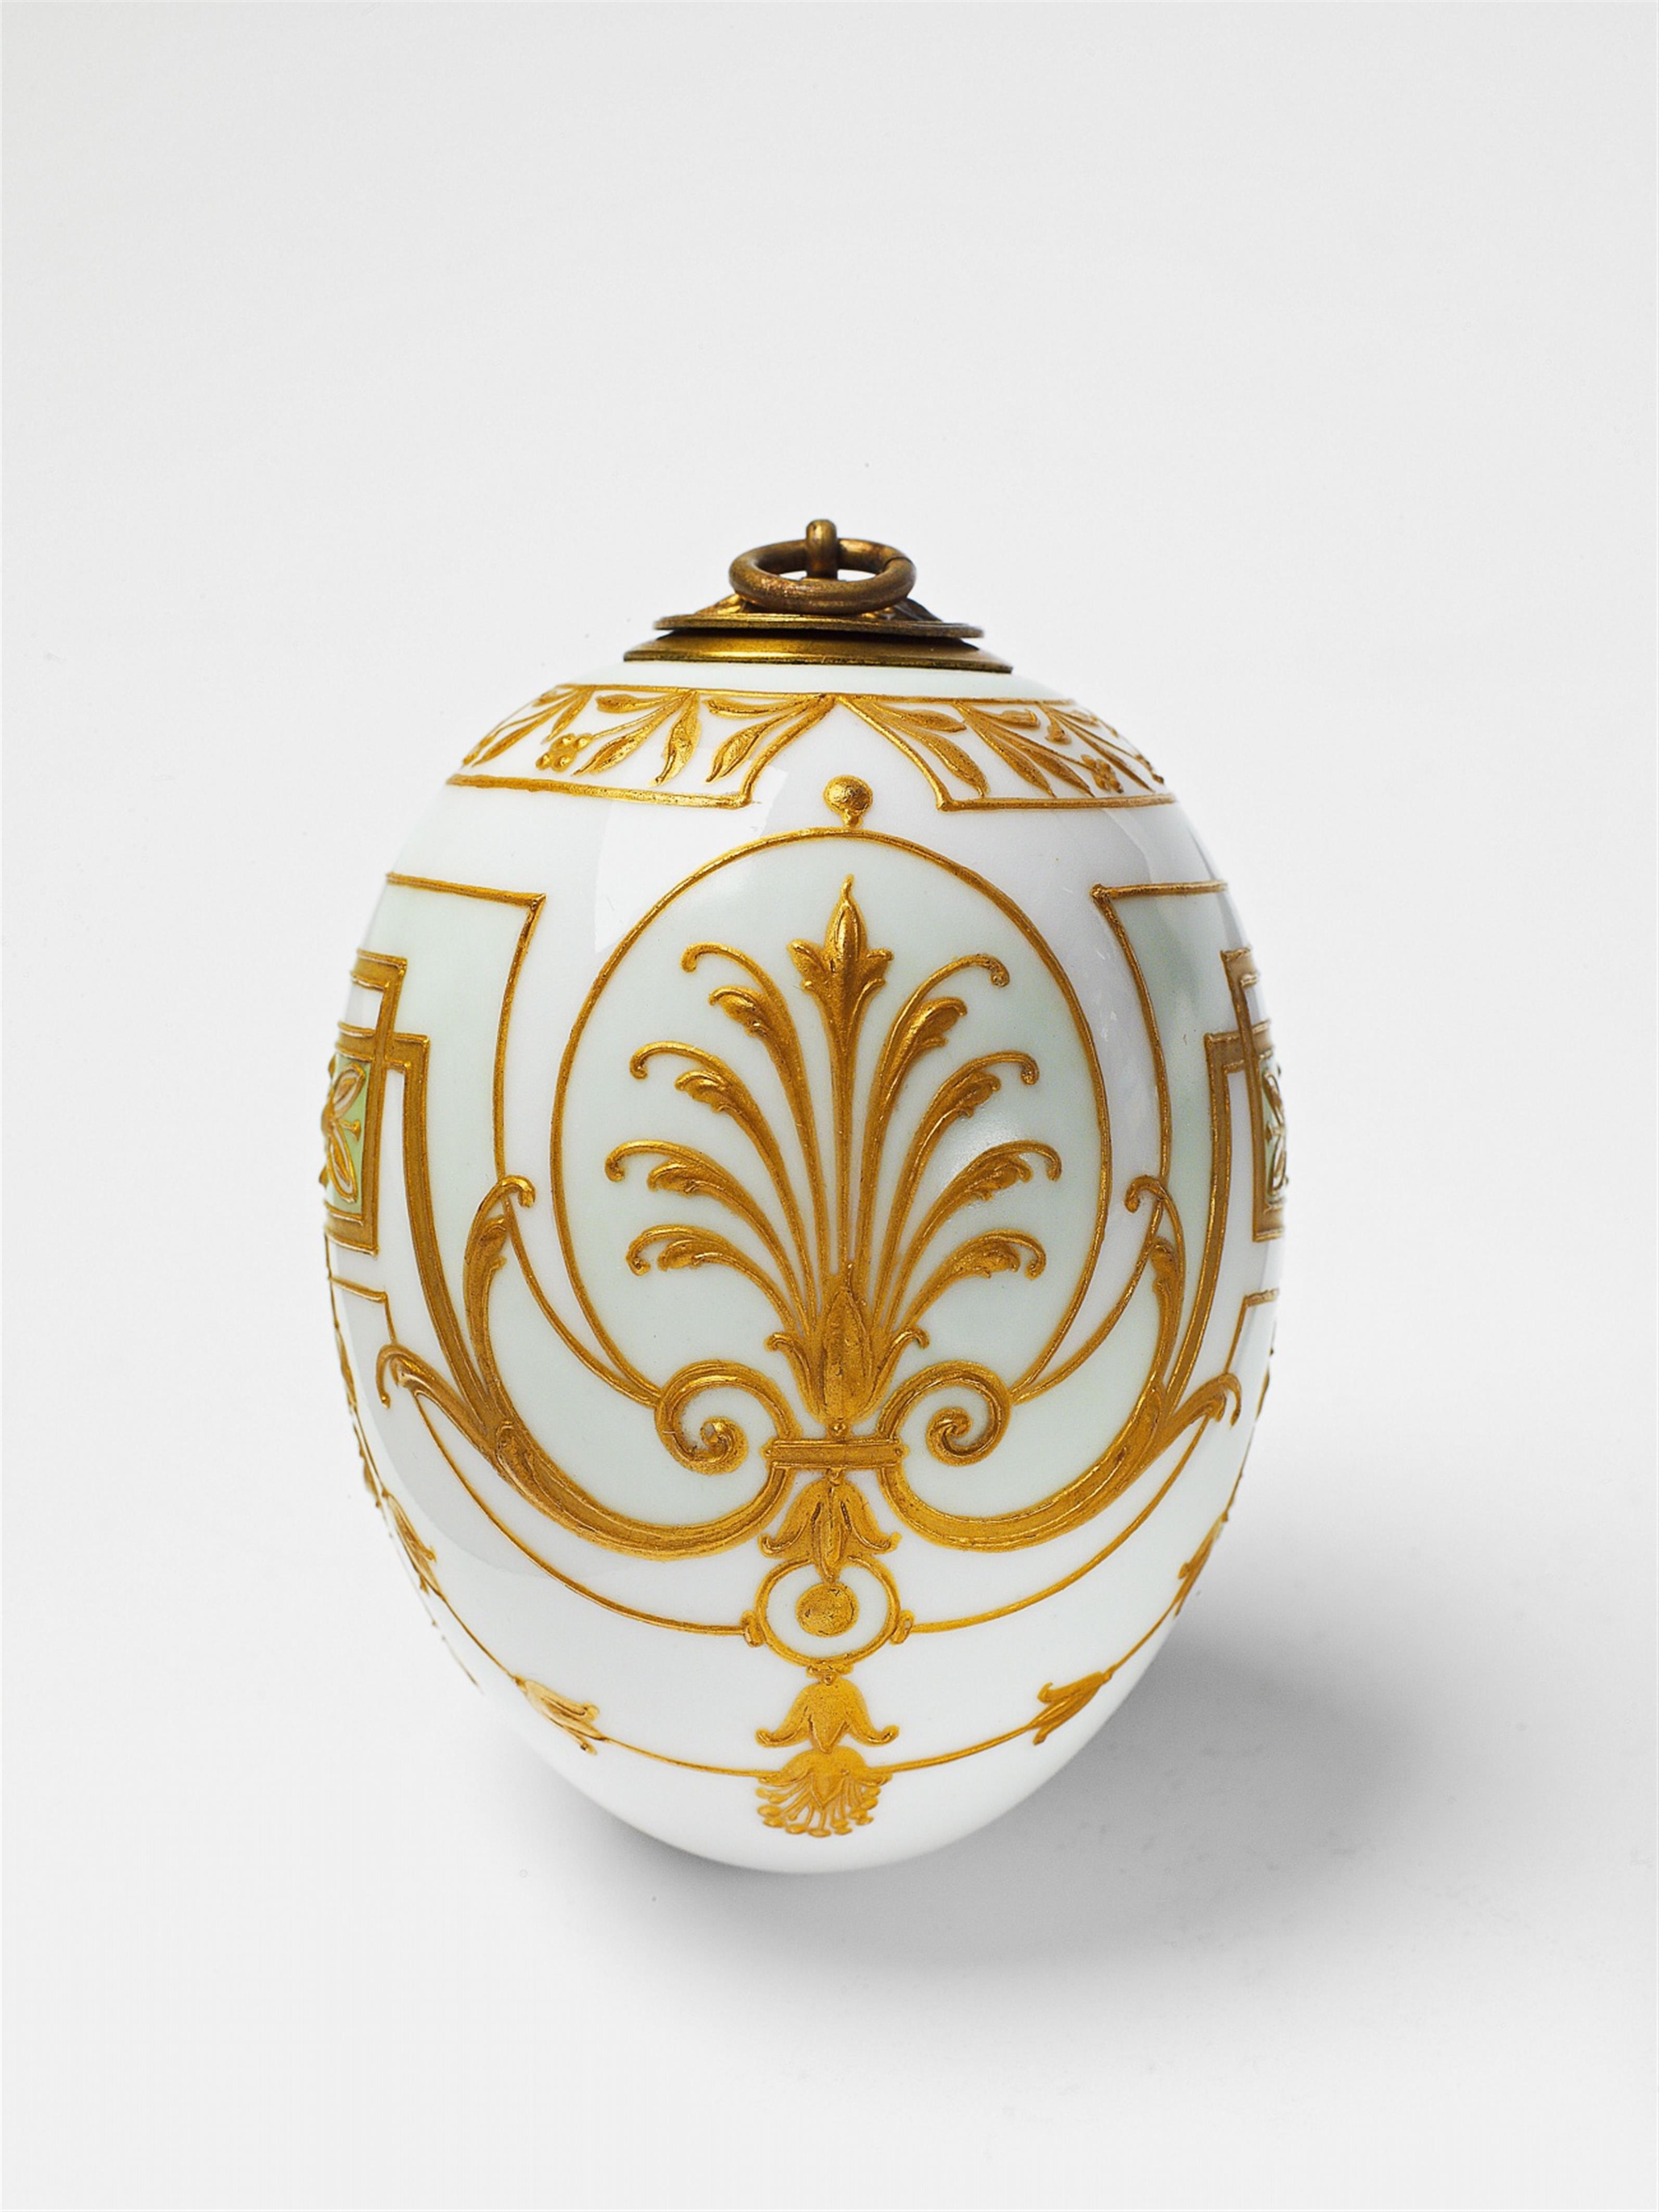 A Berlin KPM porcelain egg with a view of the Belvedere - image-2